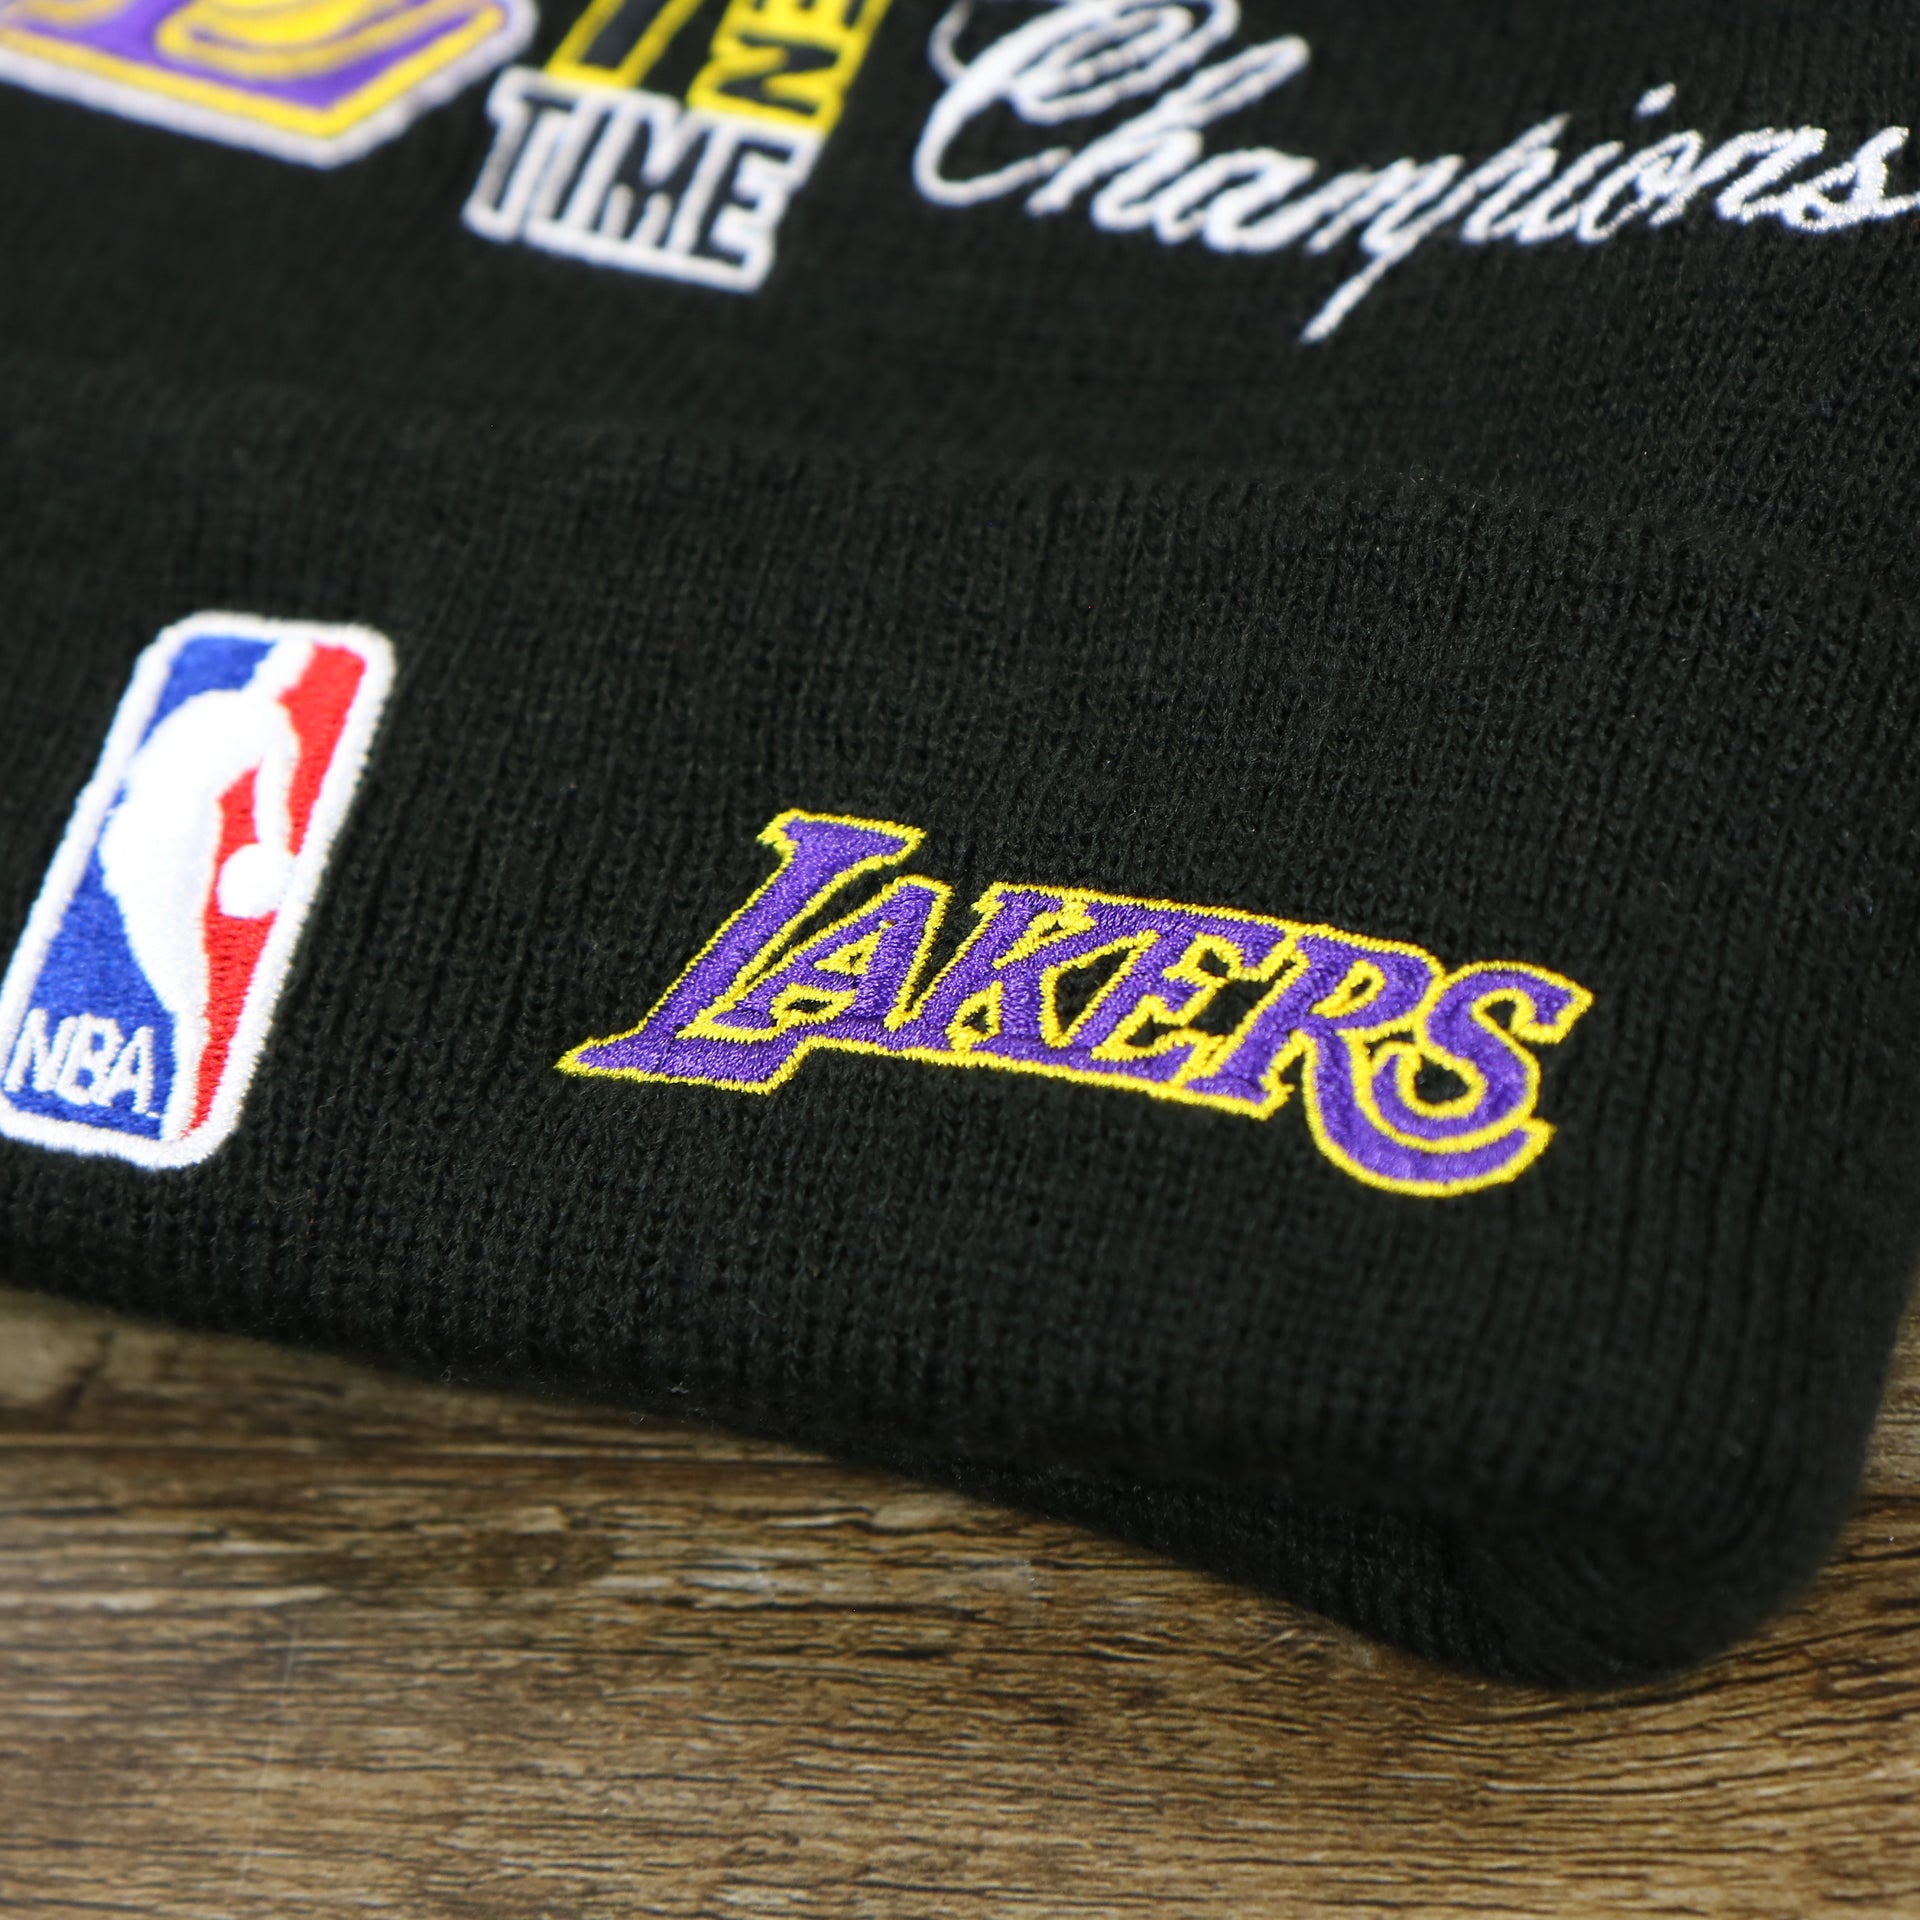 The lakers Wordmark on the Los Angeles Lakers All Over NBA Finals Side Patch 17x Champion Knit Cuff Beanie | New Era, Black